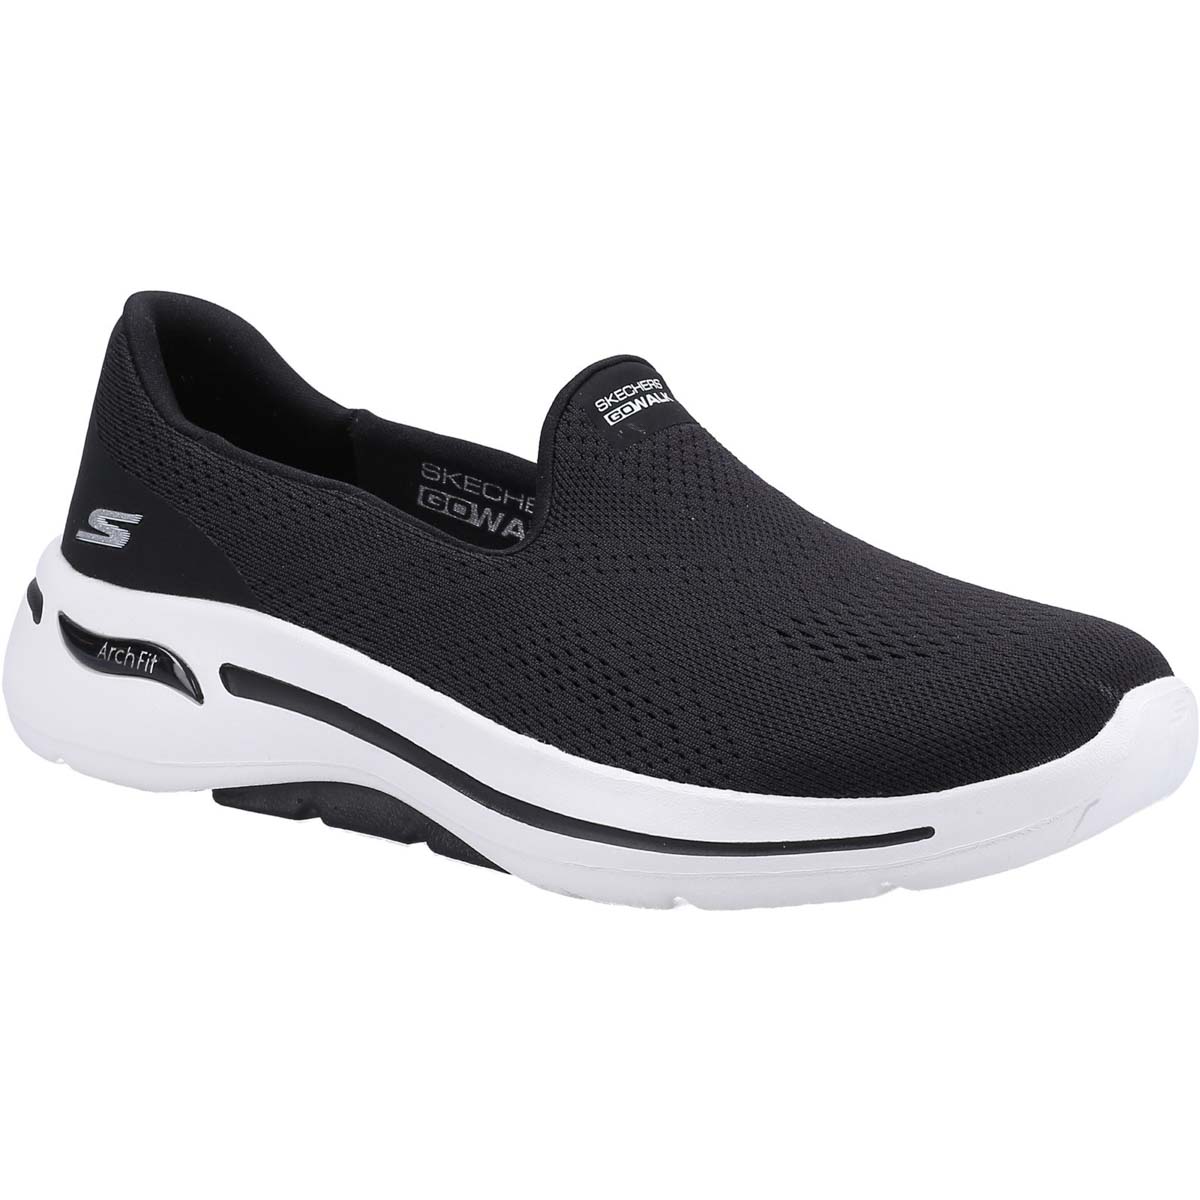 Skechers Go Walk Arch Fit Imagined Black Womens Trainers 124483 In Size 4 In Plain Black